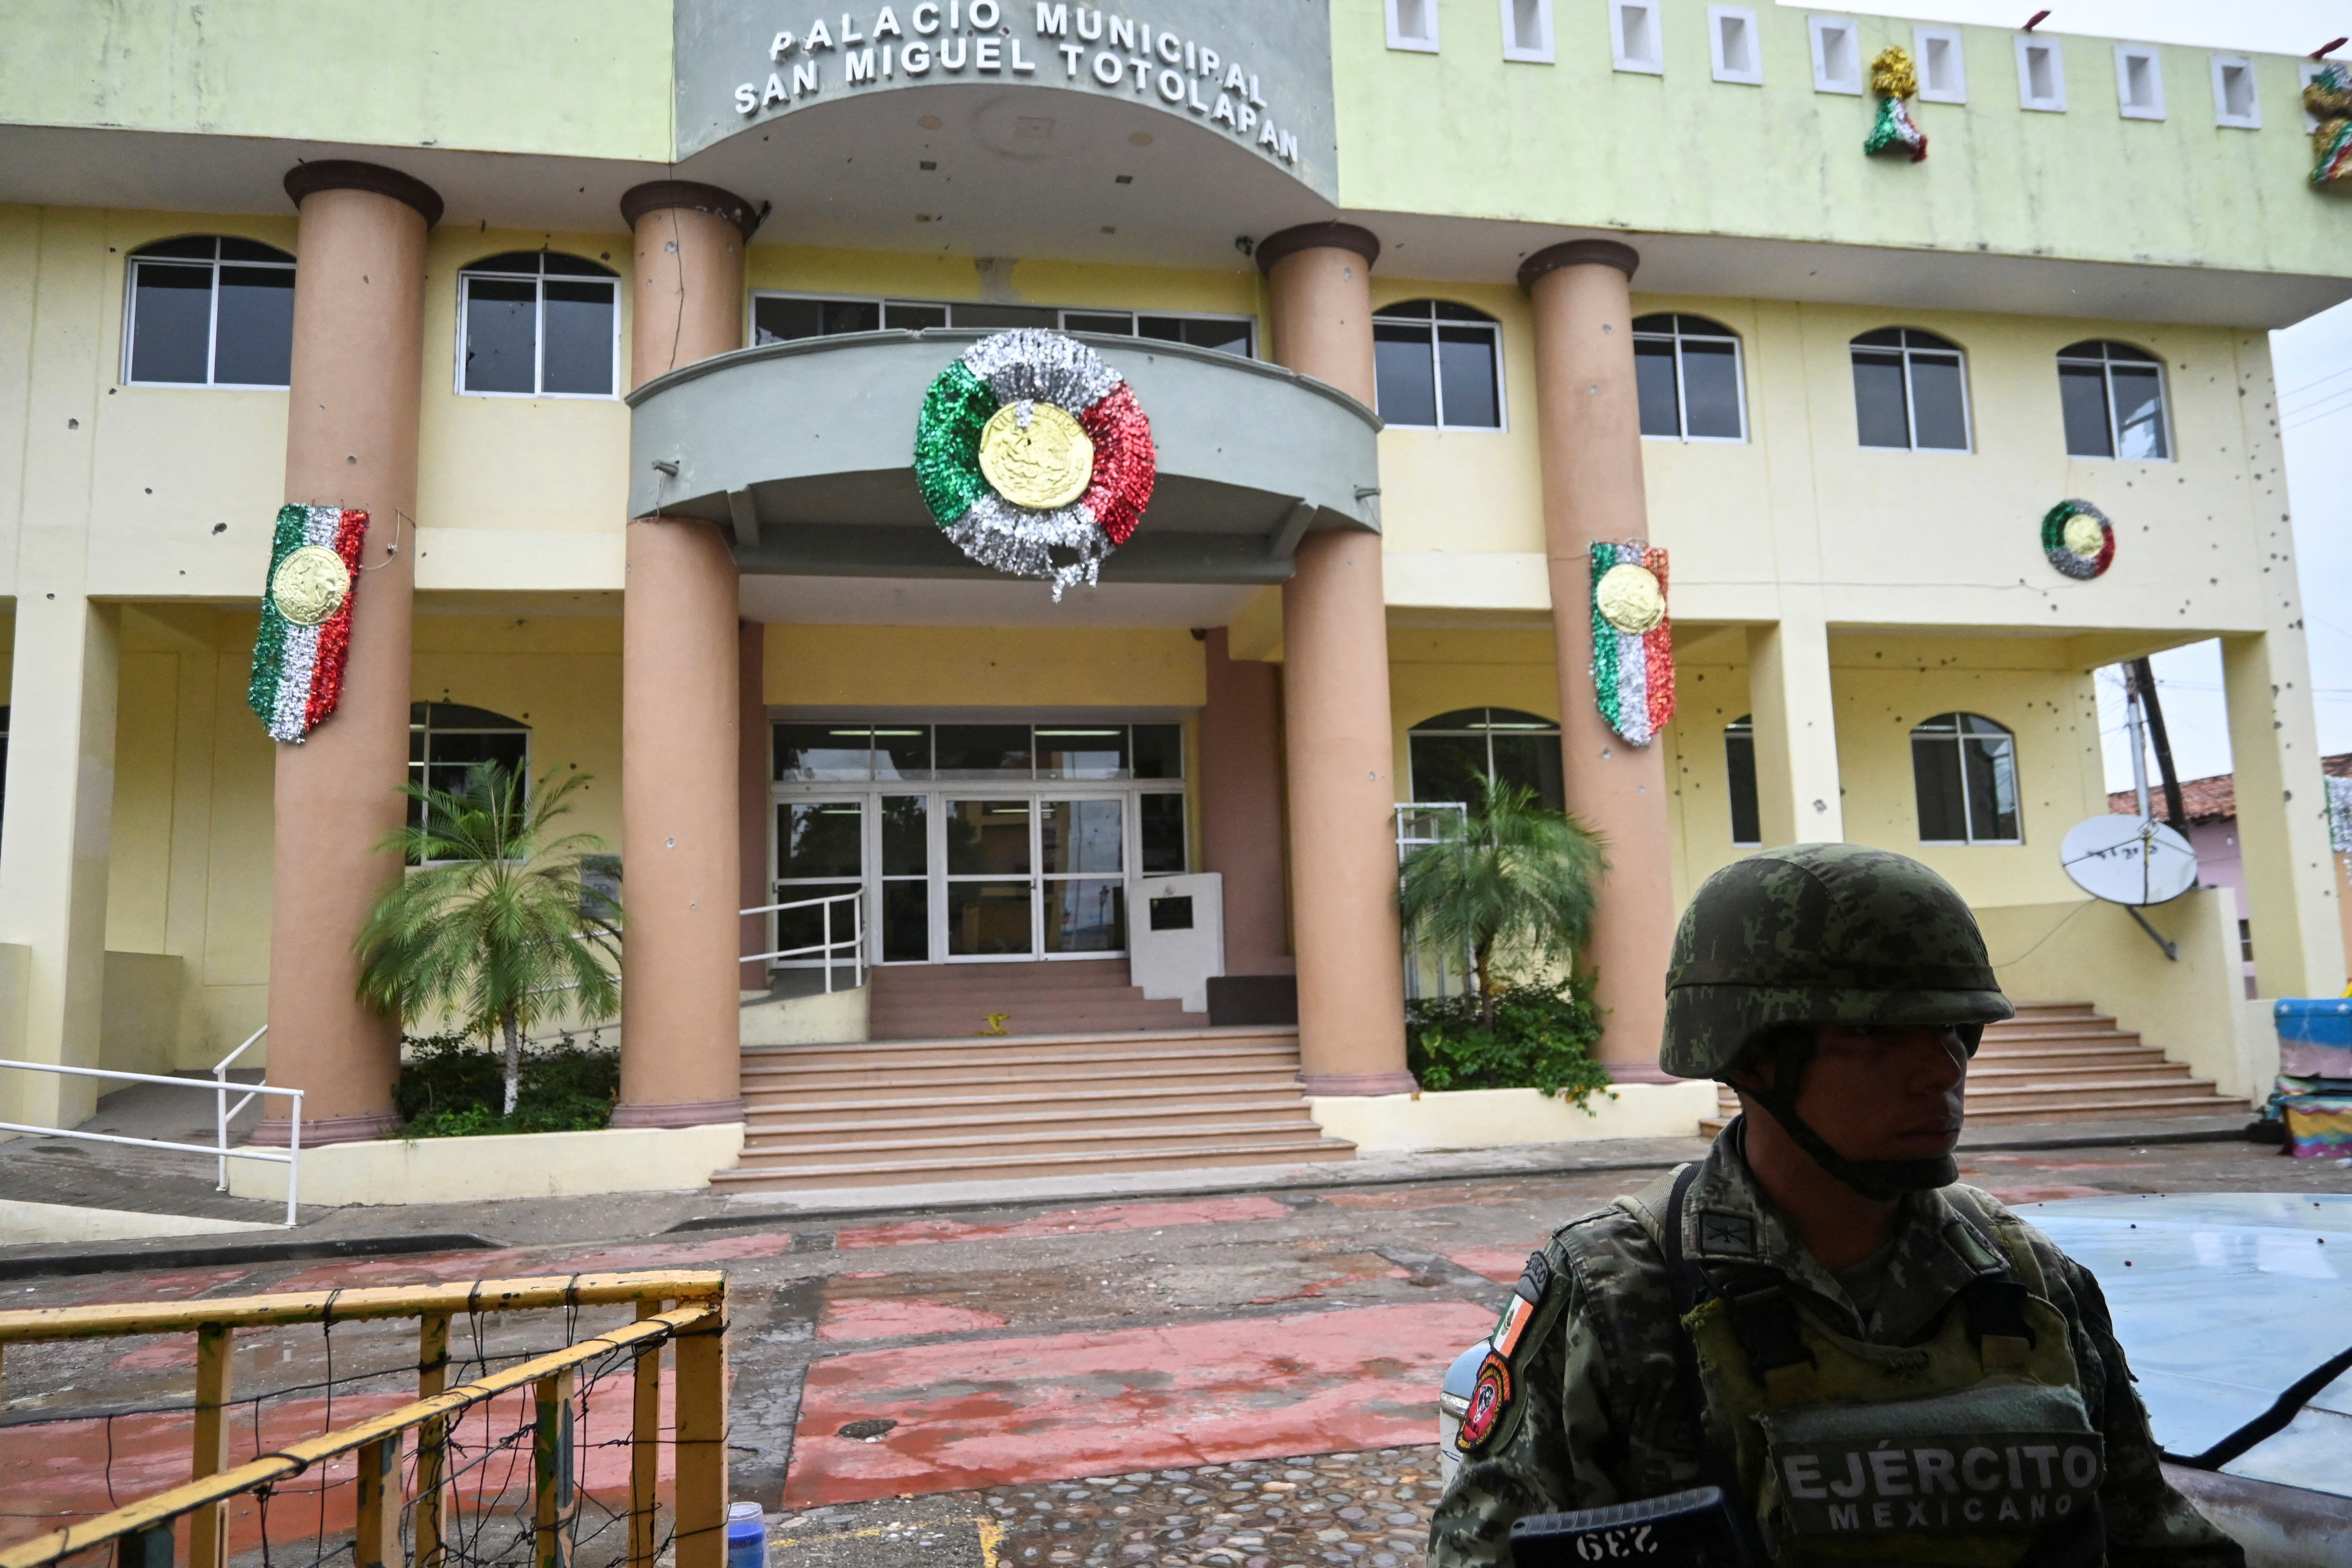 A member of security forces stands guard outside the facade of the town hall with several shots on wall, after a fight between rival gangs left several dead, in San Miguel Totolapan, state of Guerrero, Mexico October 6, 2022. REUTERS/Lenin Ocampo NO RESALES. NO ARCHIVES